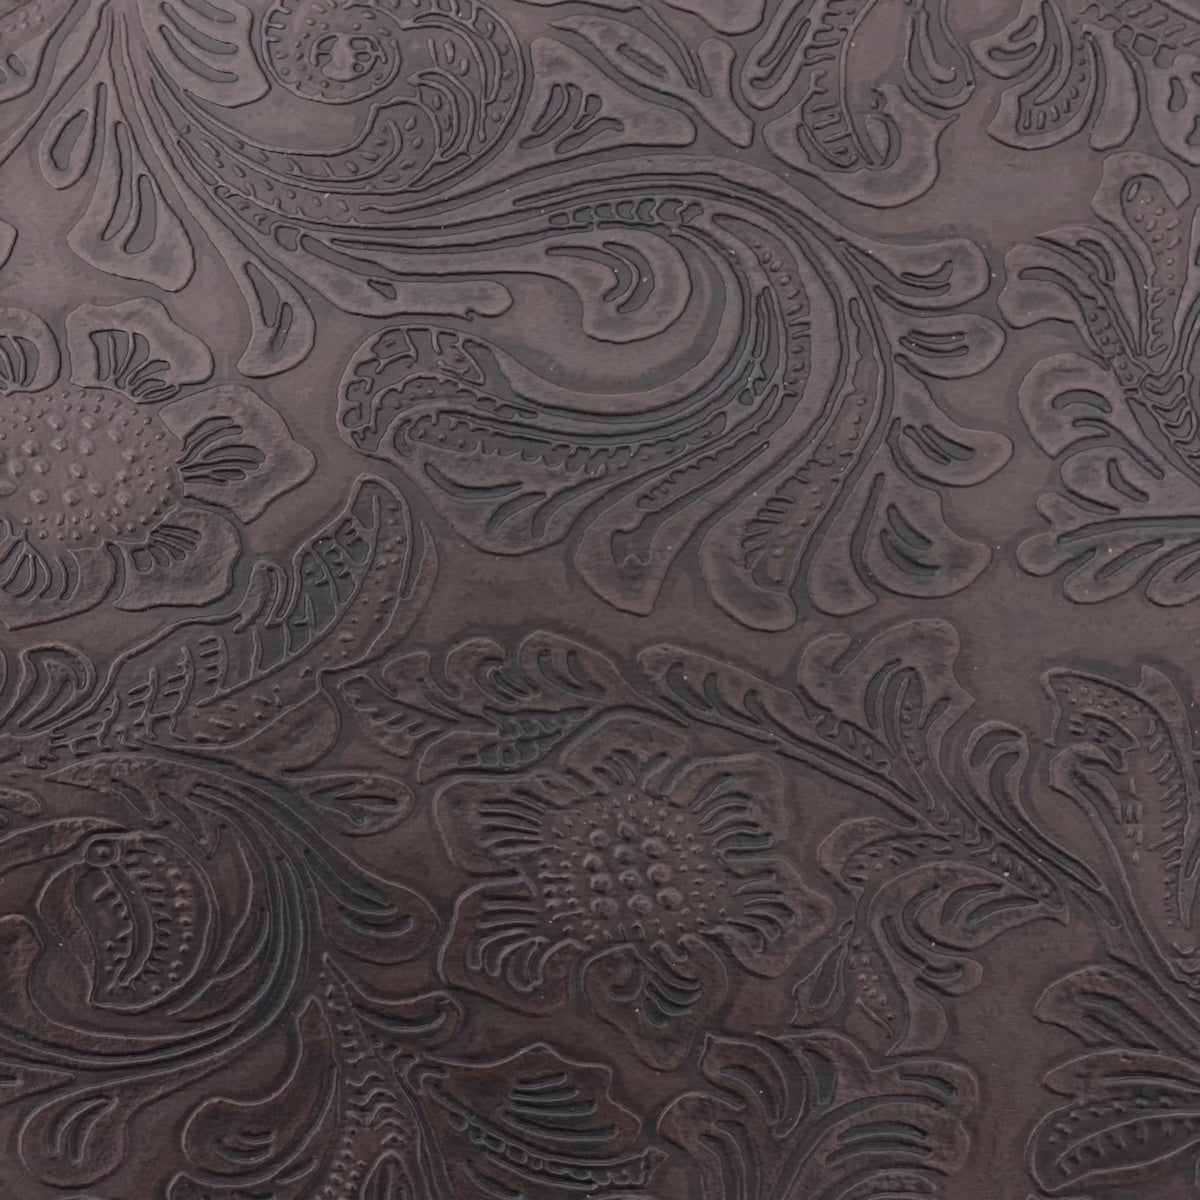 Faux Leather Fabric Upholstery Vinyl Nugget Embossed Floral Fabric